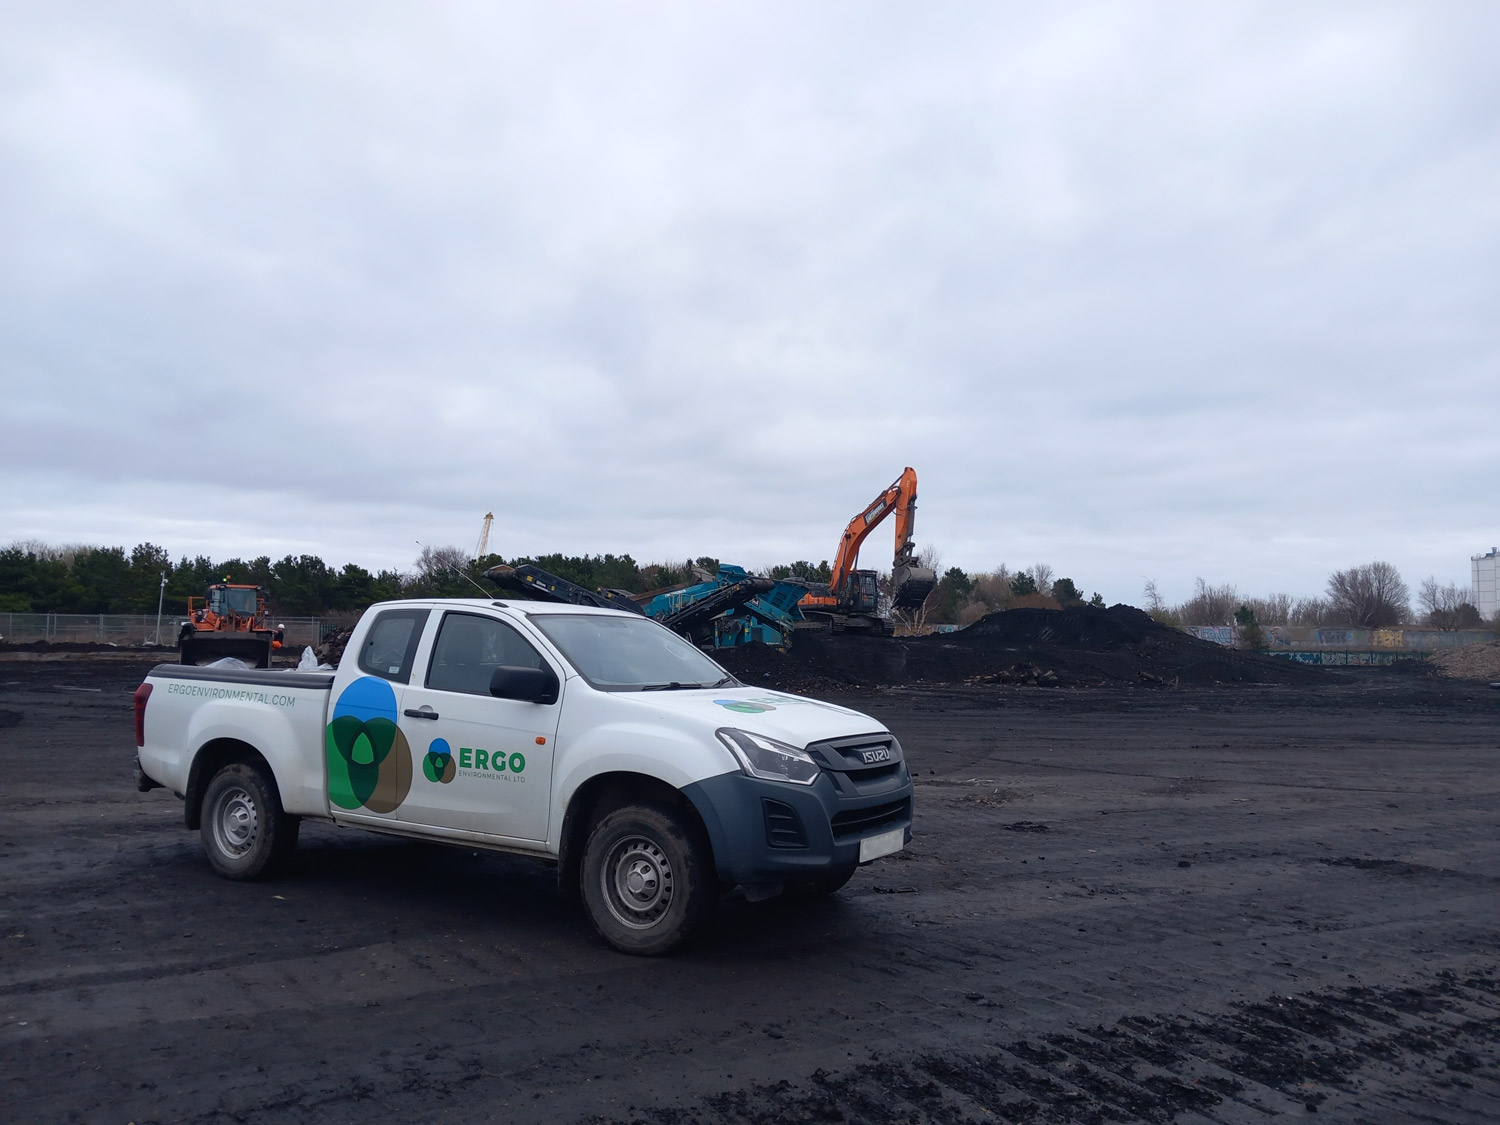 Parked white Suzuki ISUZU truck from ERGO Environmental on brownfield soil with various diggers and heap of soil in the background